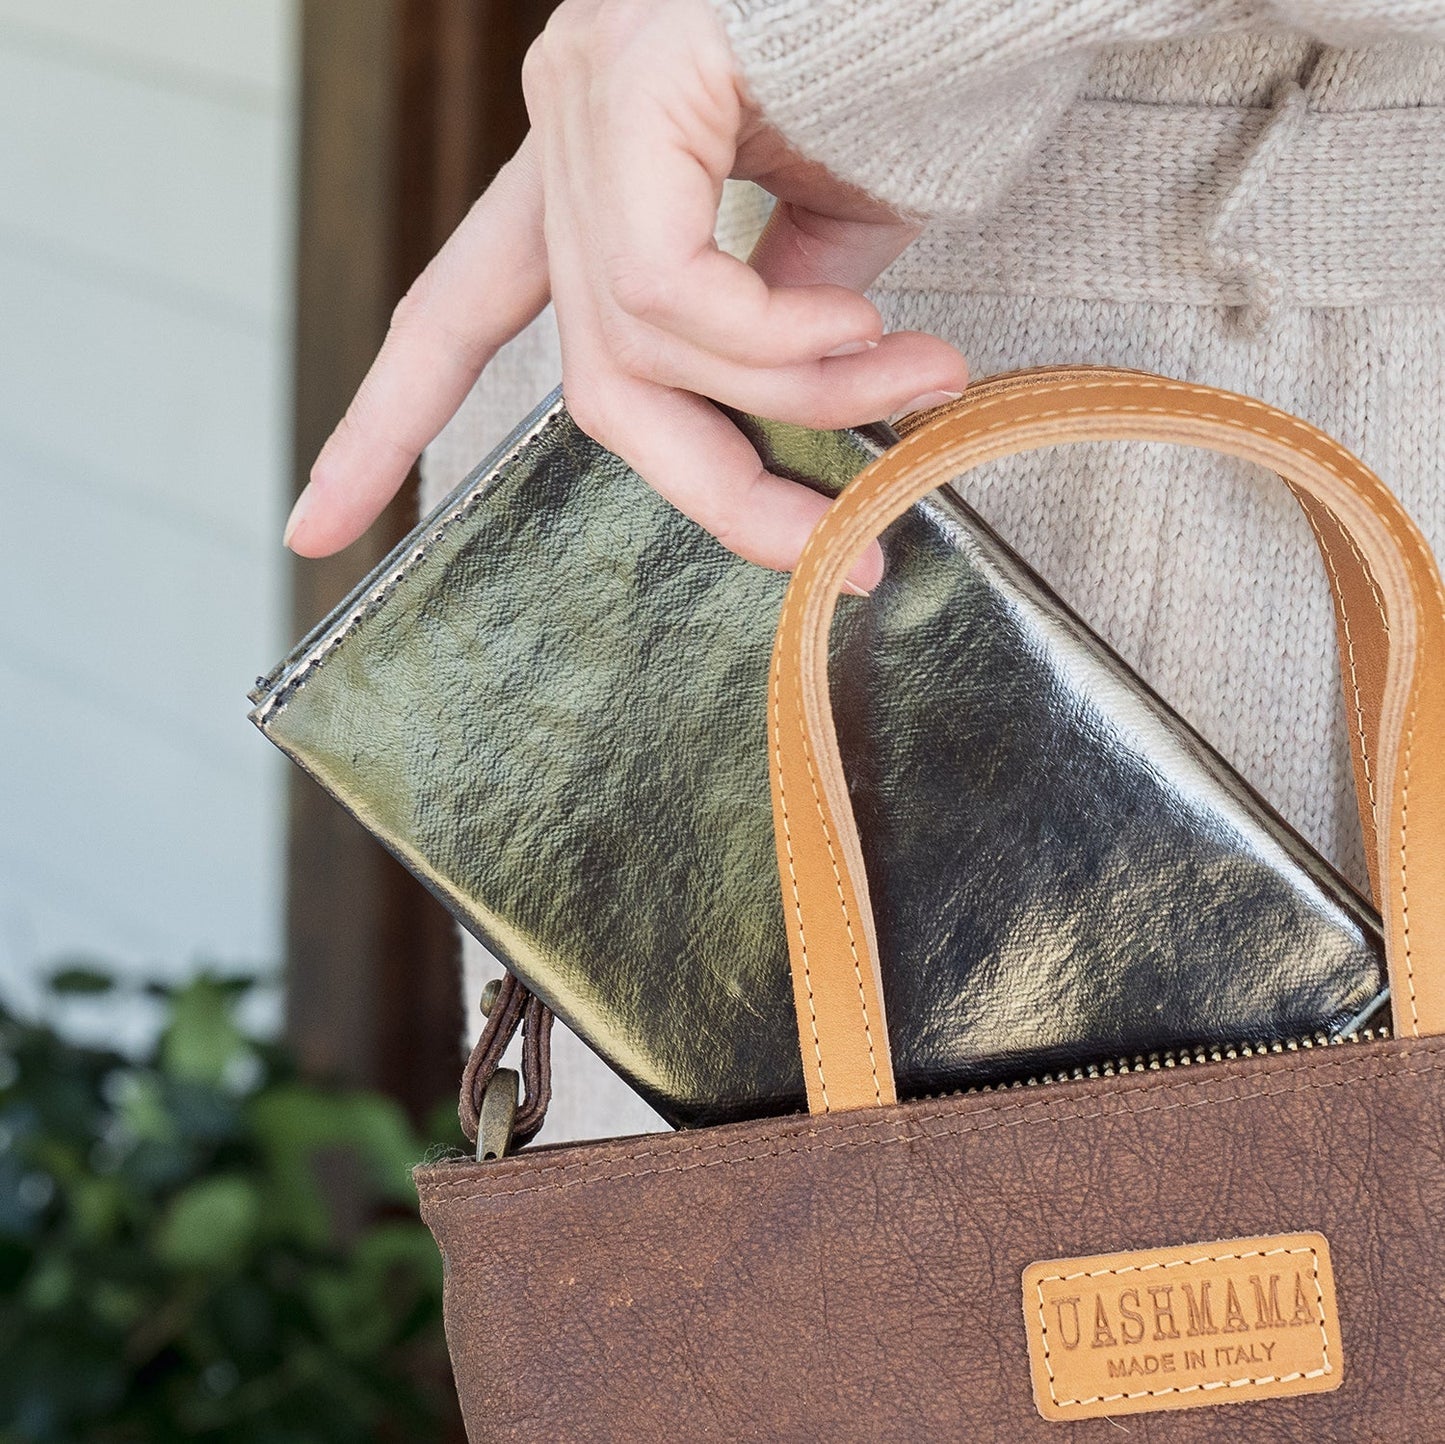 A woman is shown inserting a dark metallic grey large washable paper wallet, into a dark brown washable paper handbag which has the UASHMAMA logo in a tan leather tag on the front.